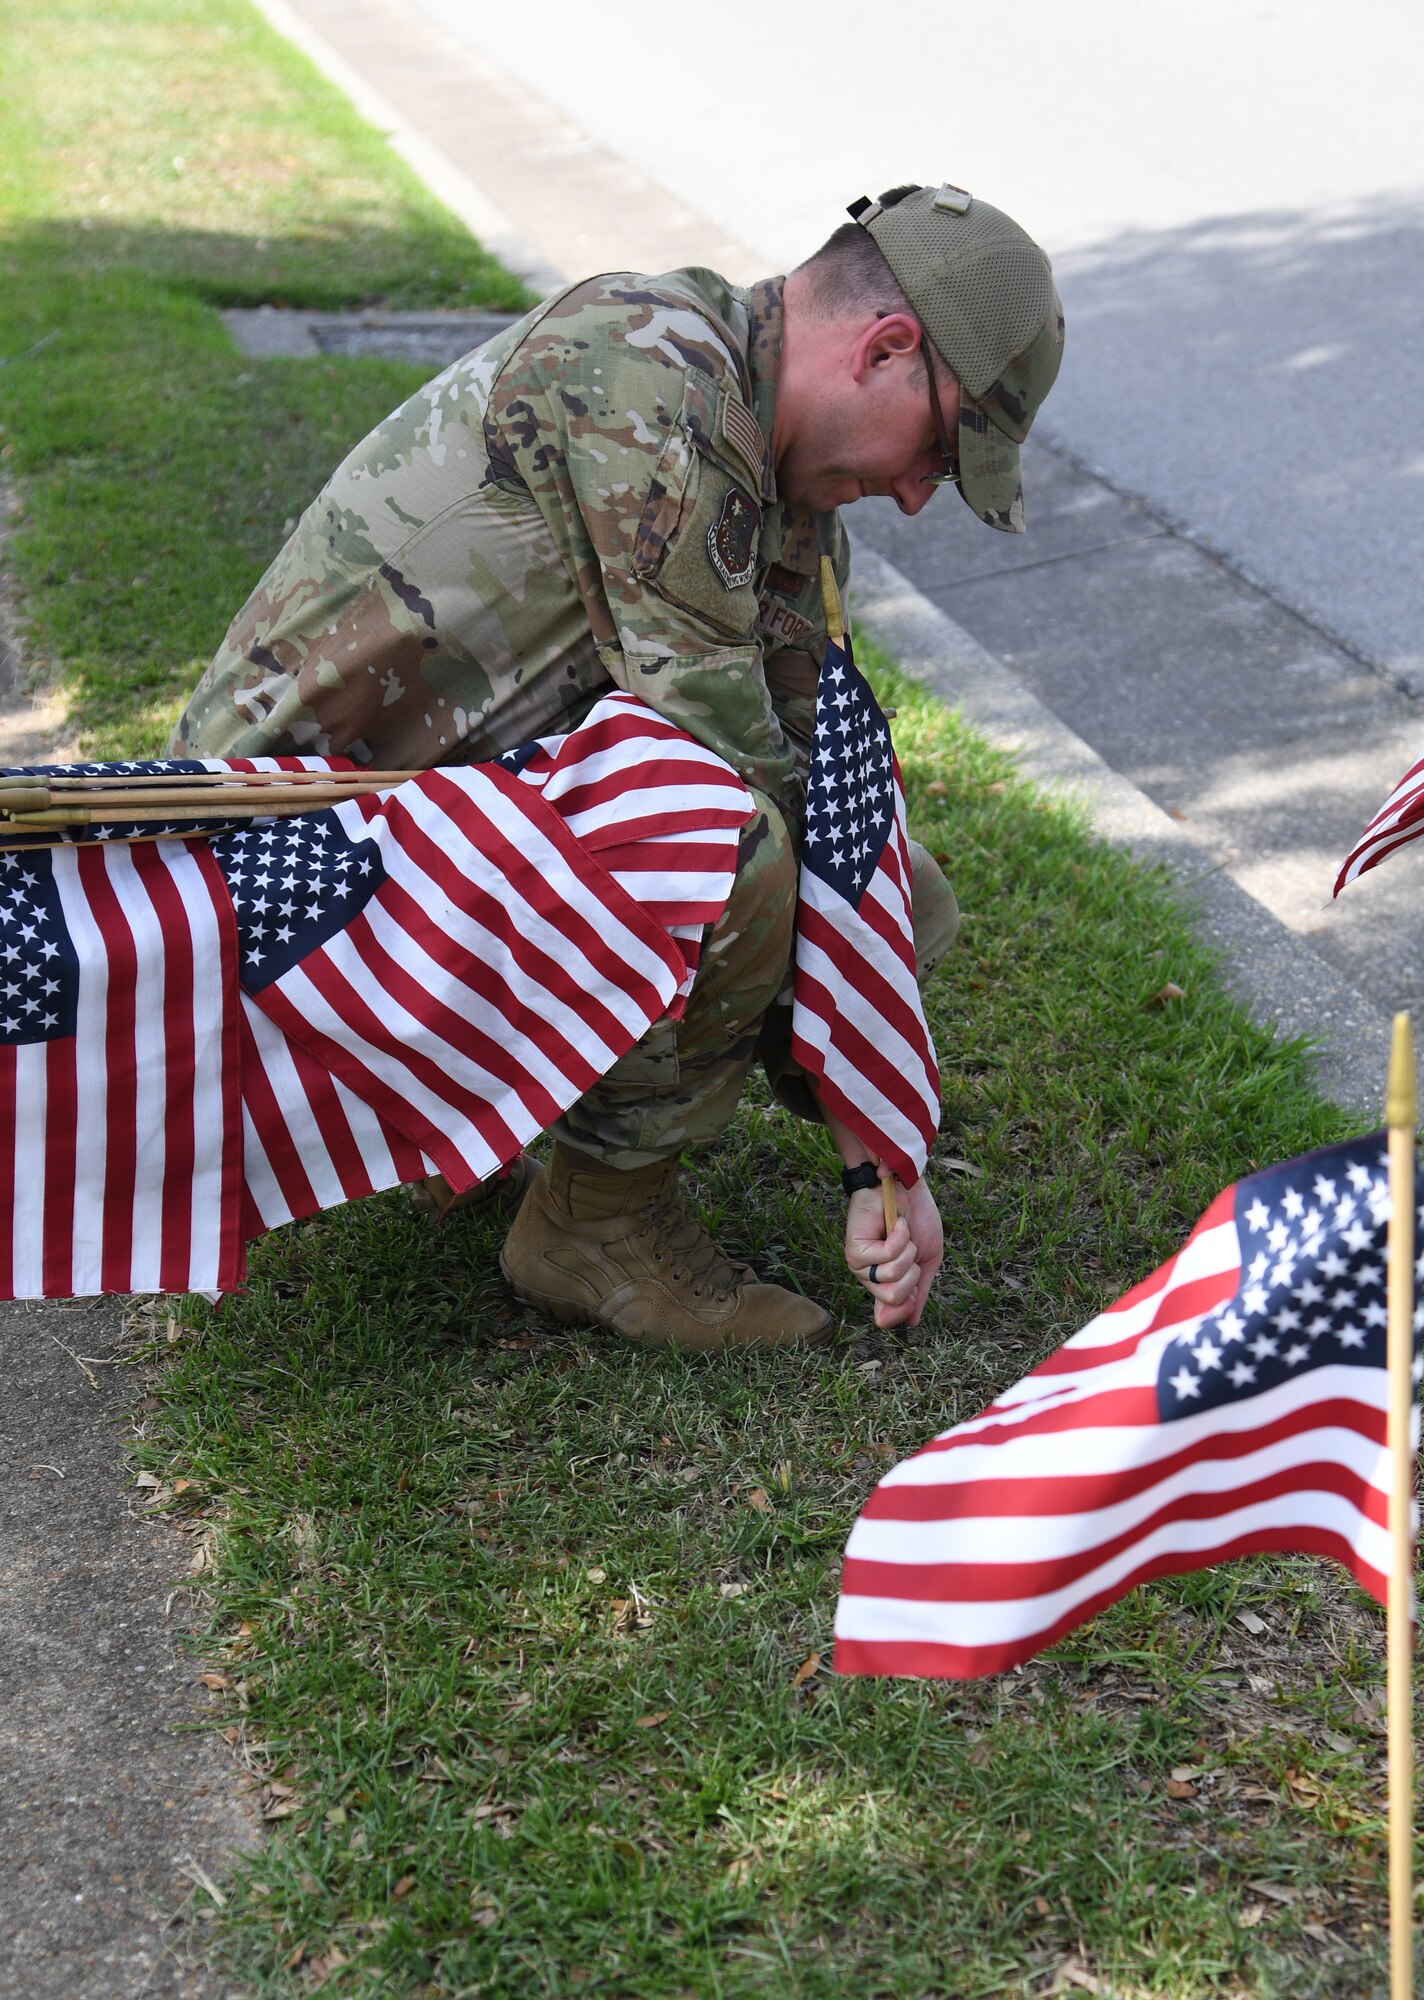 U.S. Air Force Airman 1st Class Thomas Lenoir, 81st Training Wing paralegal, places U.S. flags in the ground along Larcher Blvd. at Keesler Air Force Base, Mississippi, June 13, 2022. June 14 is Flag Day, a celebration of the history of the American flag and a time to remember proper etiquette for its display. Flag Day recognizes the adoption of the Stars and Stripes as the official flag of the United States on June 14, 1777, by the Continental Congress meeting in Philadelphia. This is the 5th year that the Air Force Sergeants Association Chapter 652 has volunteered to place 1,000 flags along Larcher Blvd. and Meadows Drive. (U.S. Air Force photo by Kemberly Groue)